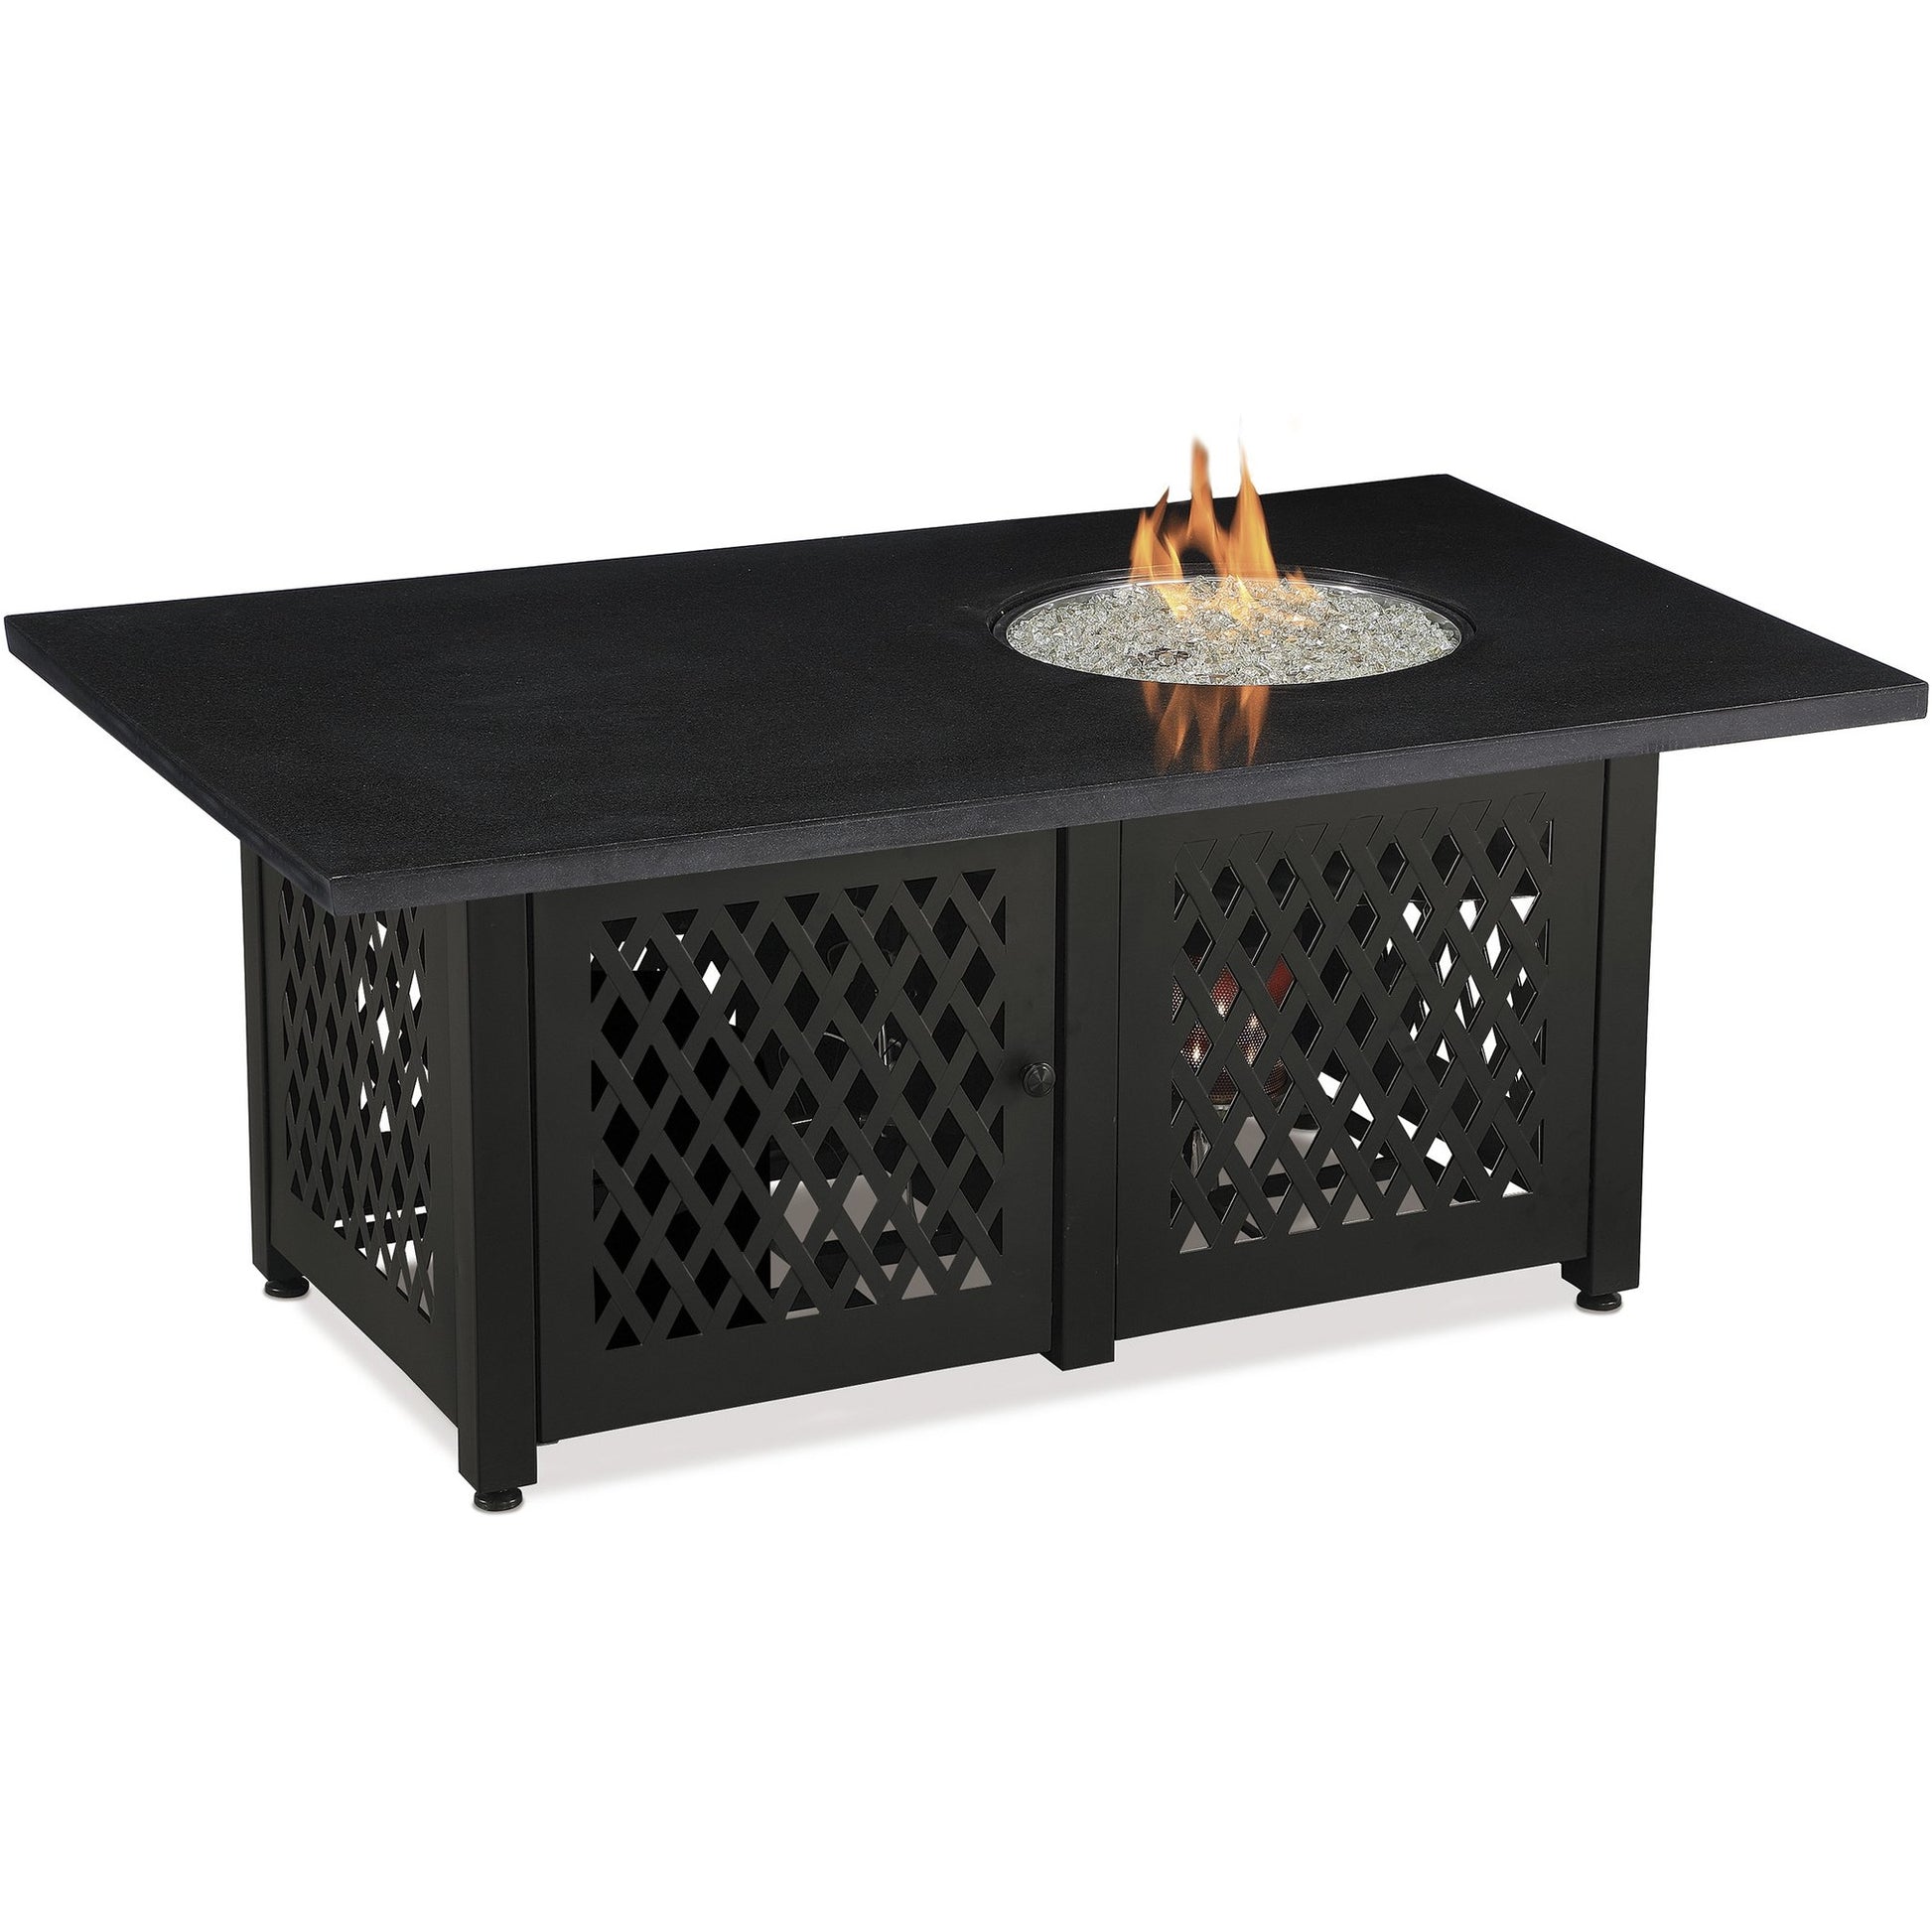 Endless Summer LP Gas Outdoor Fire Pit with Dual Heat Technology and Granite Mantel GAD18100M freeshipping - Luxury Tech Inc.